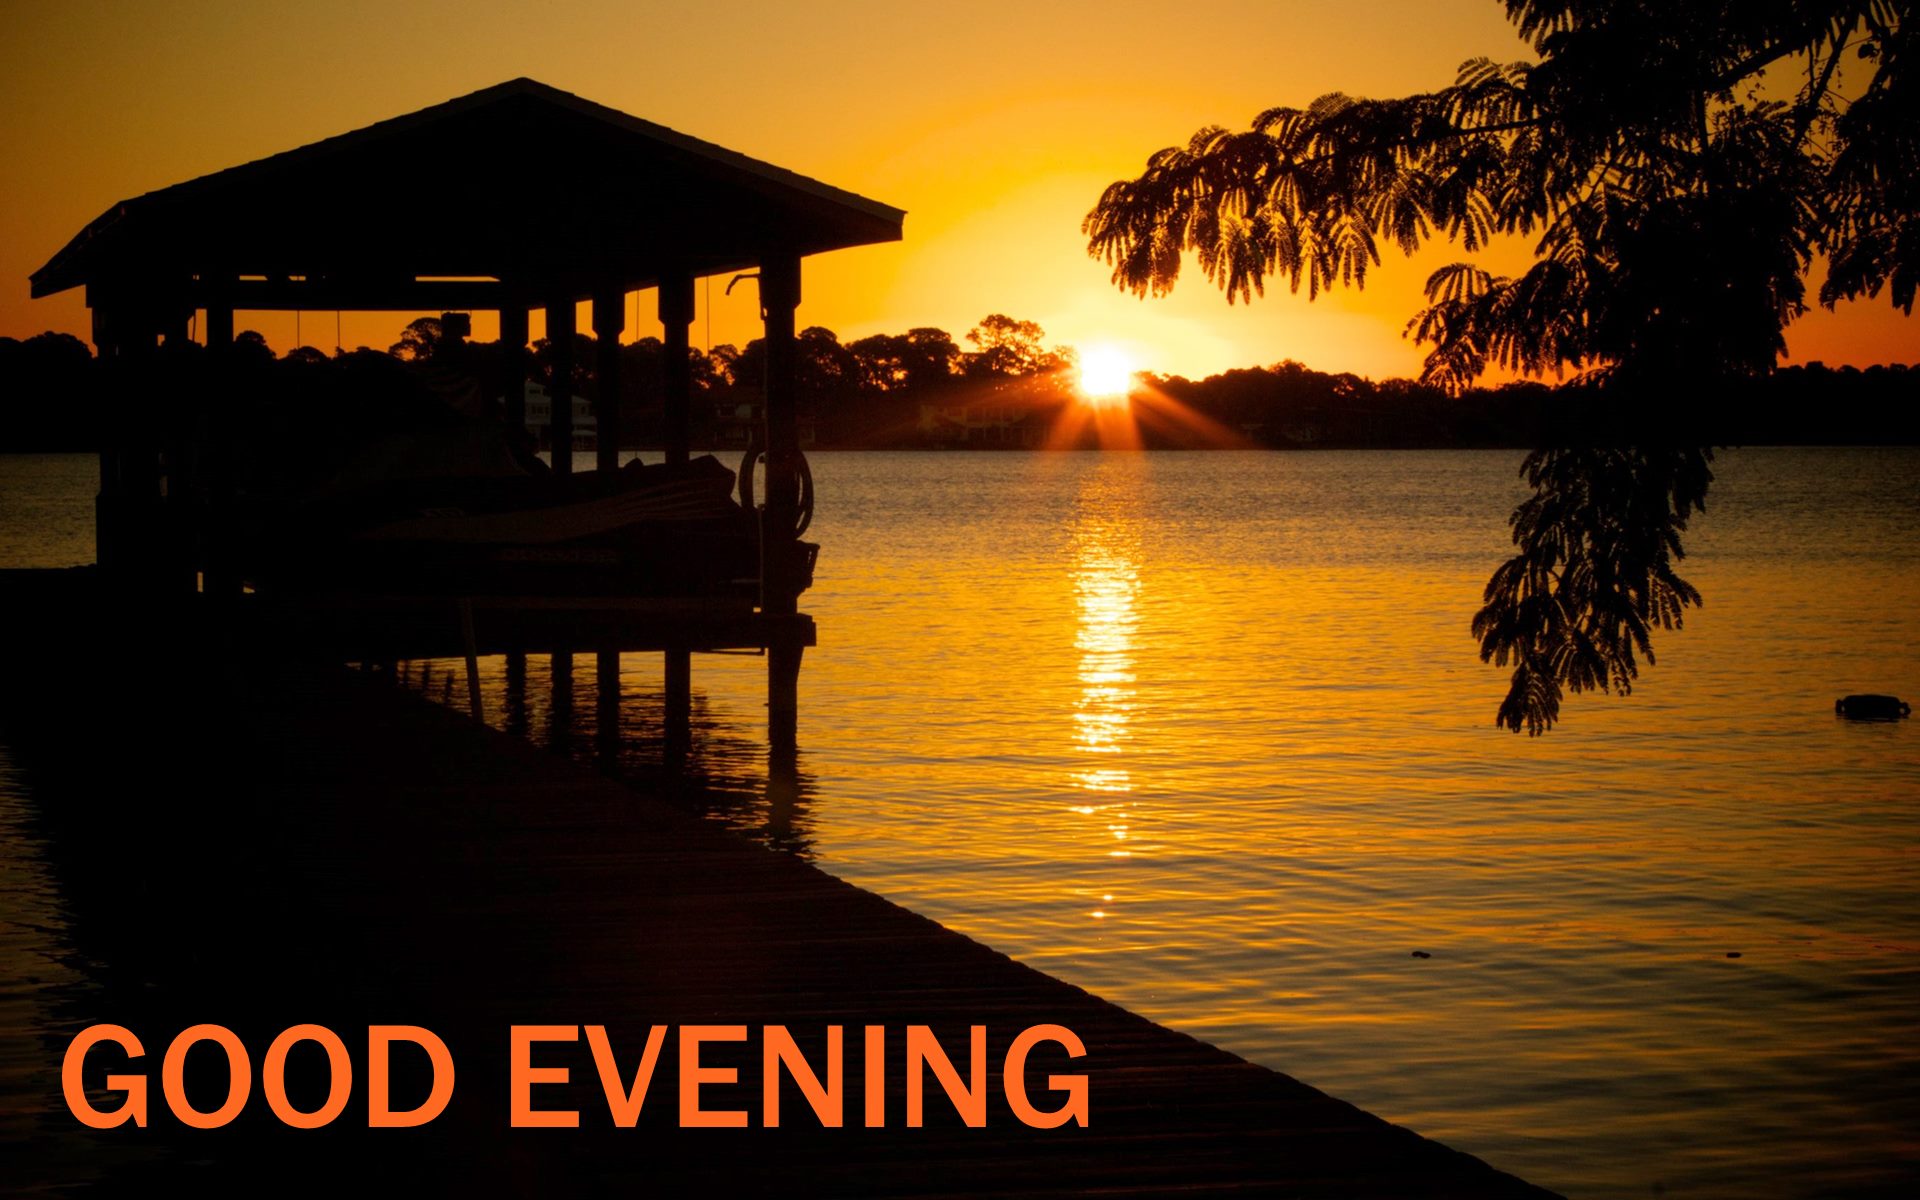 Good Evening Whatsapp Hd Photo Free Download for Friends.